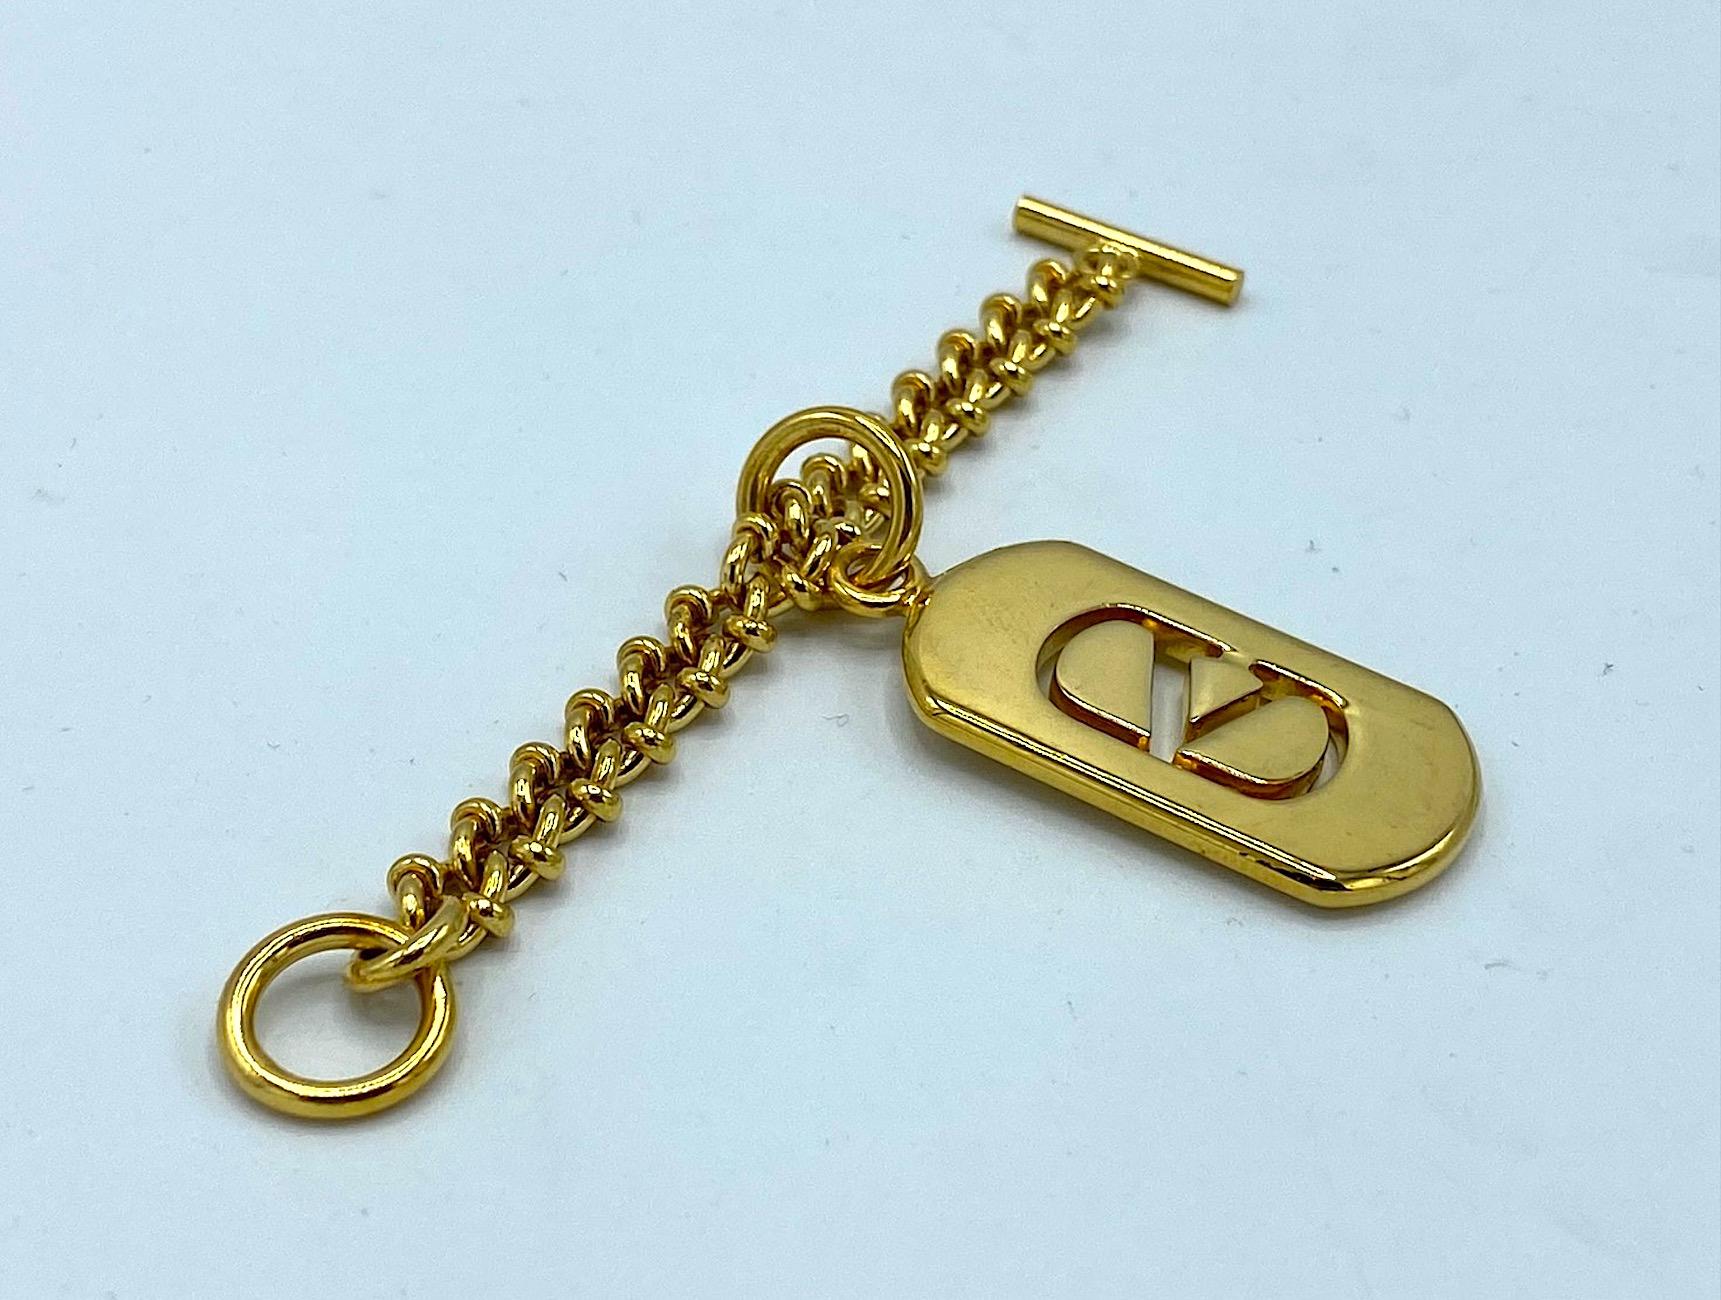 A lovely vintage Valentino gold plate key ring with logo dog tag charm. The tag is rectangular with curved ends in shape. The Valentino logo is cut out of the metal. The tag or charm is approximately 0.75  inch wide and 1.5inches long. The chain is